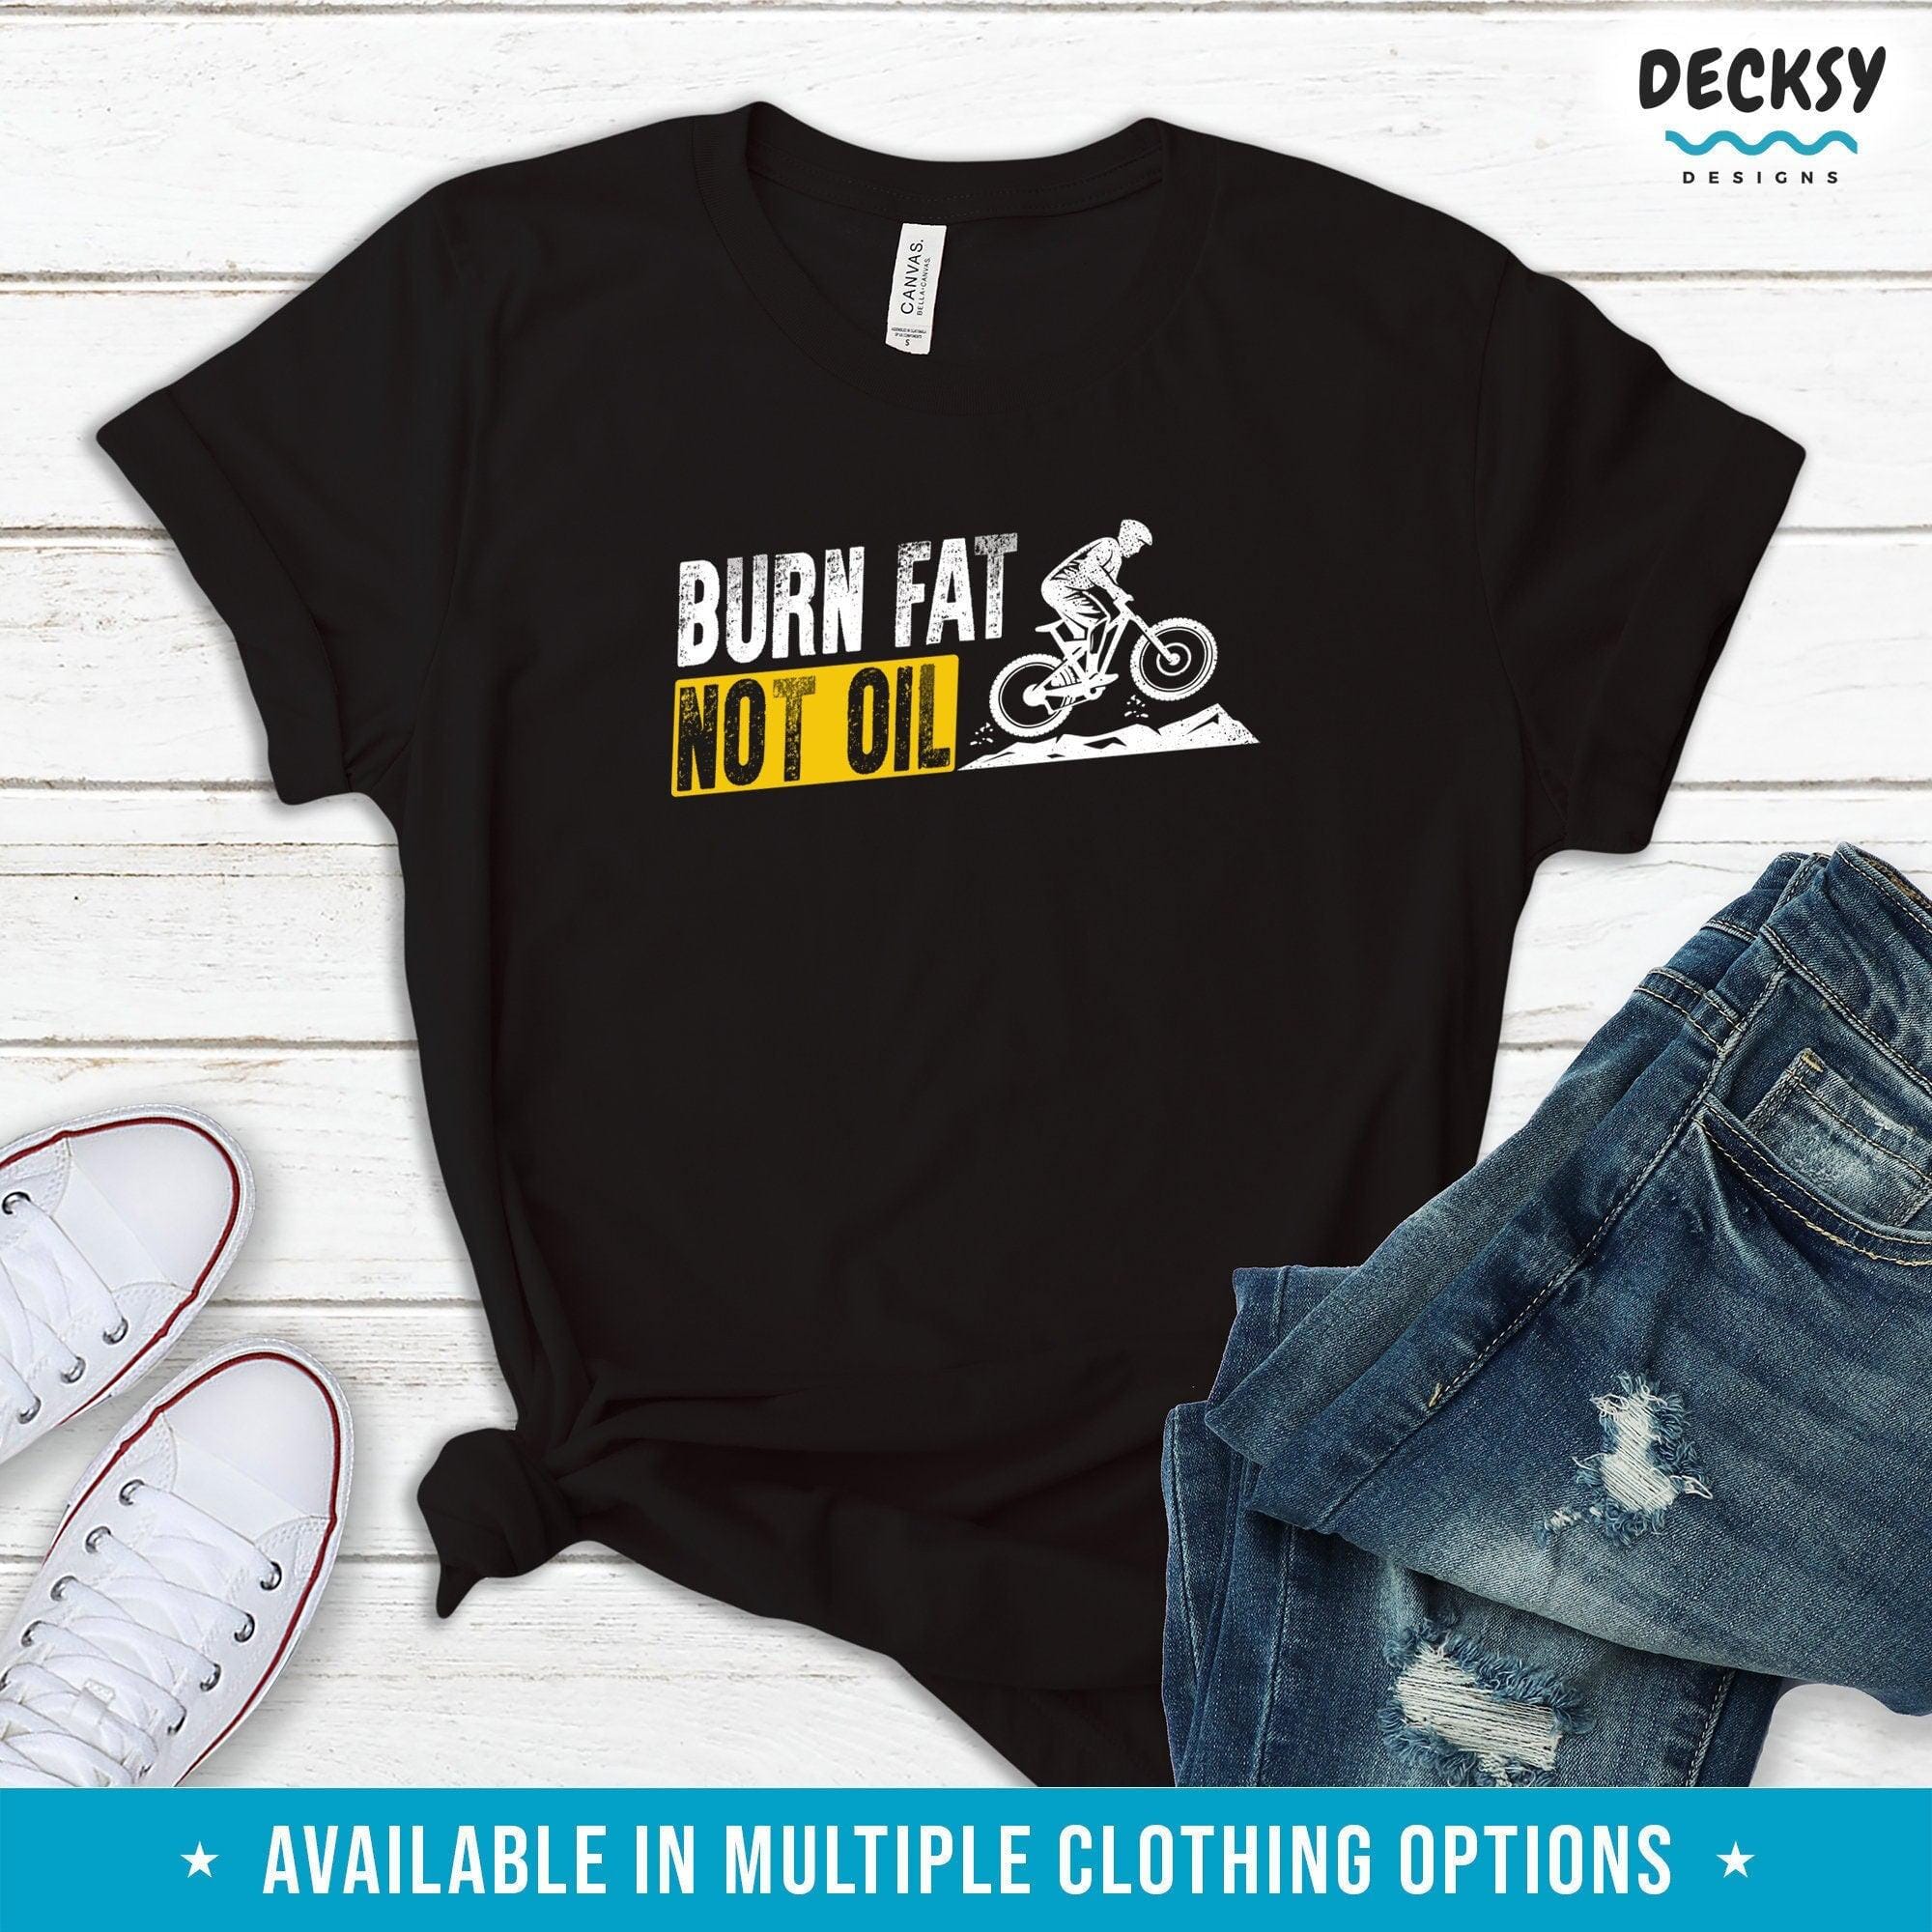 Cyclist Shirt for Men, Environmental Gift-Clothing:Gender-Neutral Adult Clothing:Tops & Tees:T-shirts:Graphic Tees-DecksyDesigns